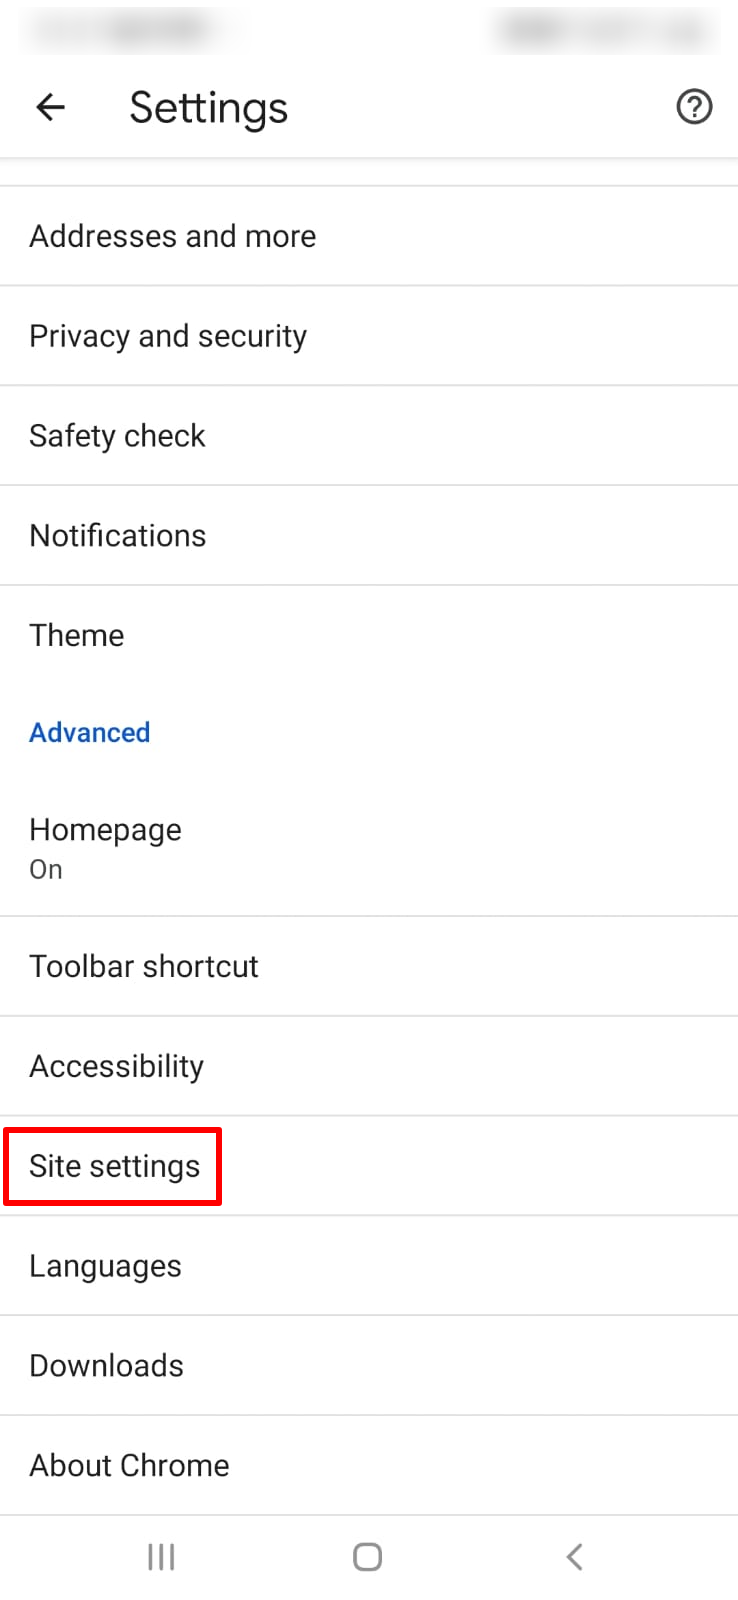 How to Block or Enable JavaScript on Chrome for Android step 3